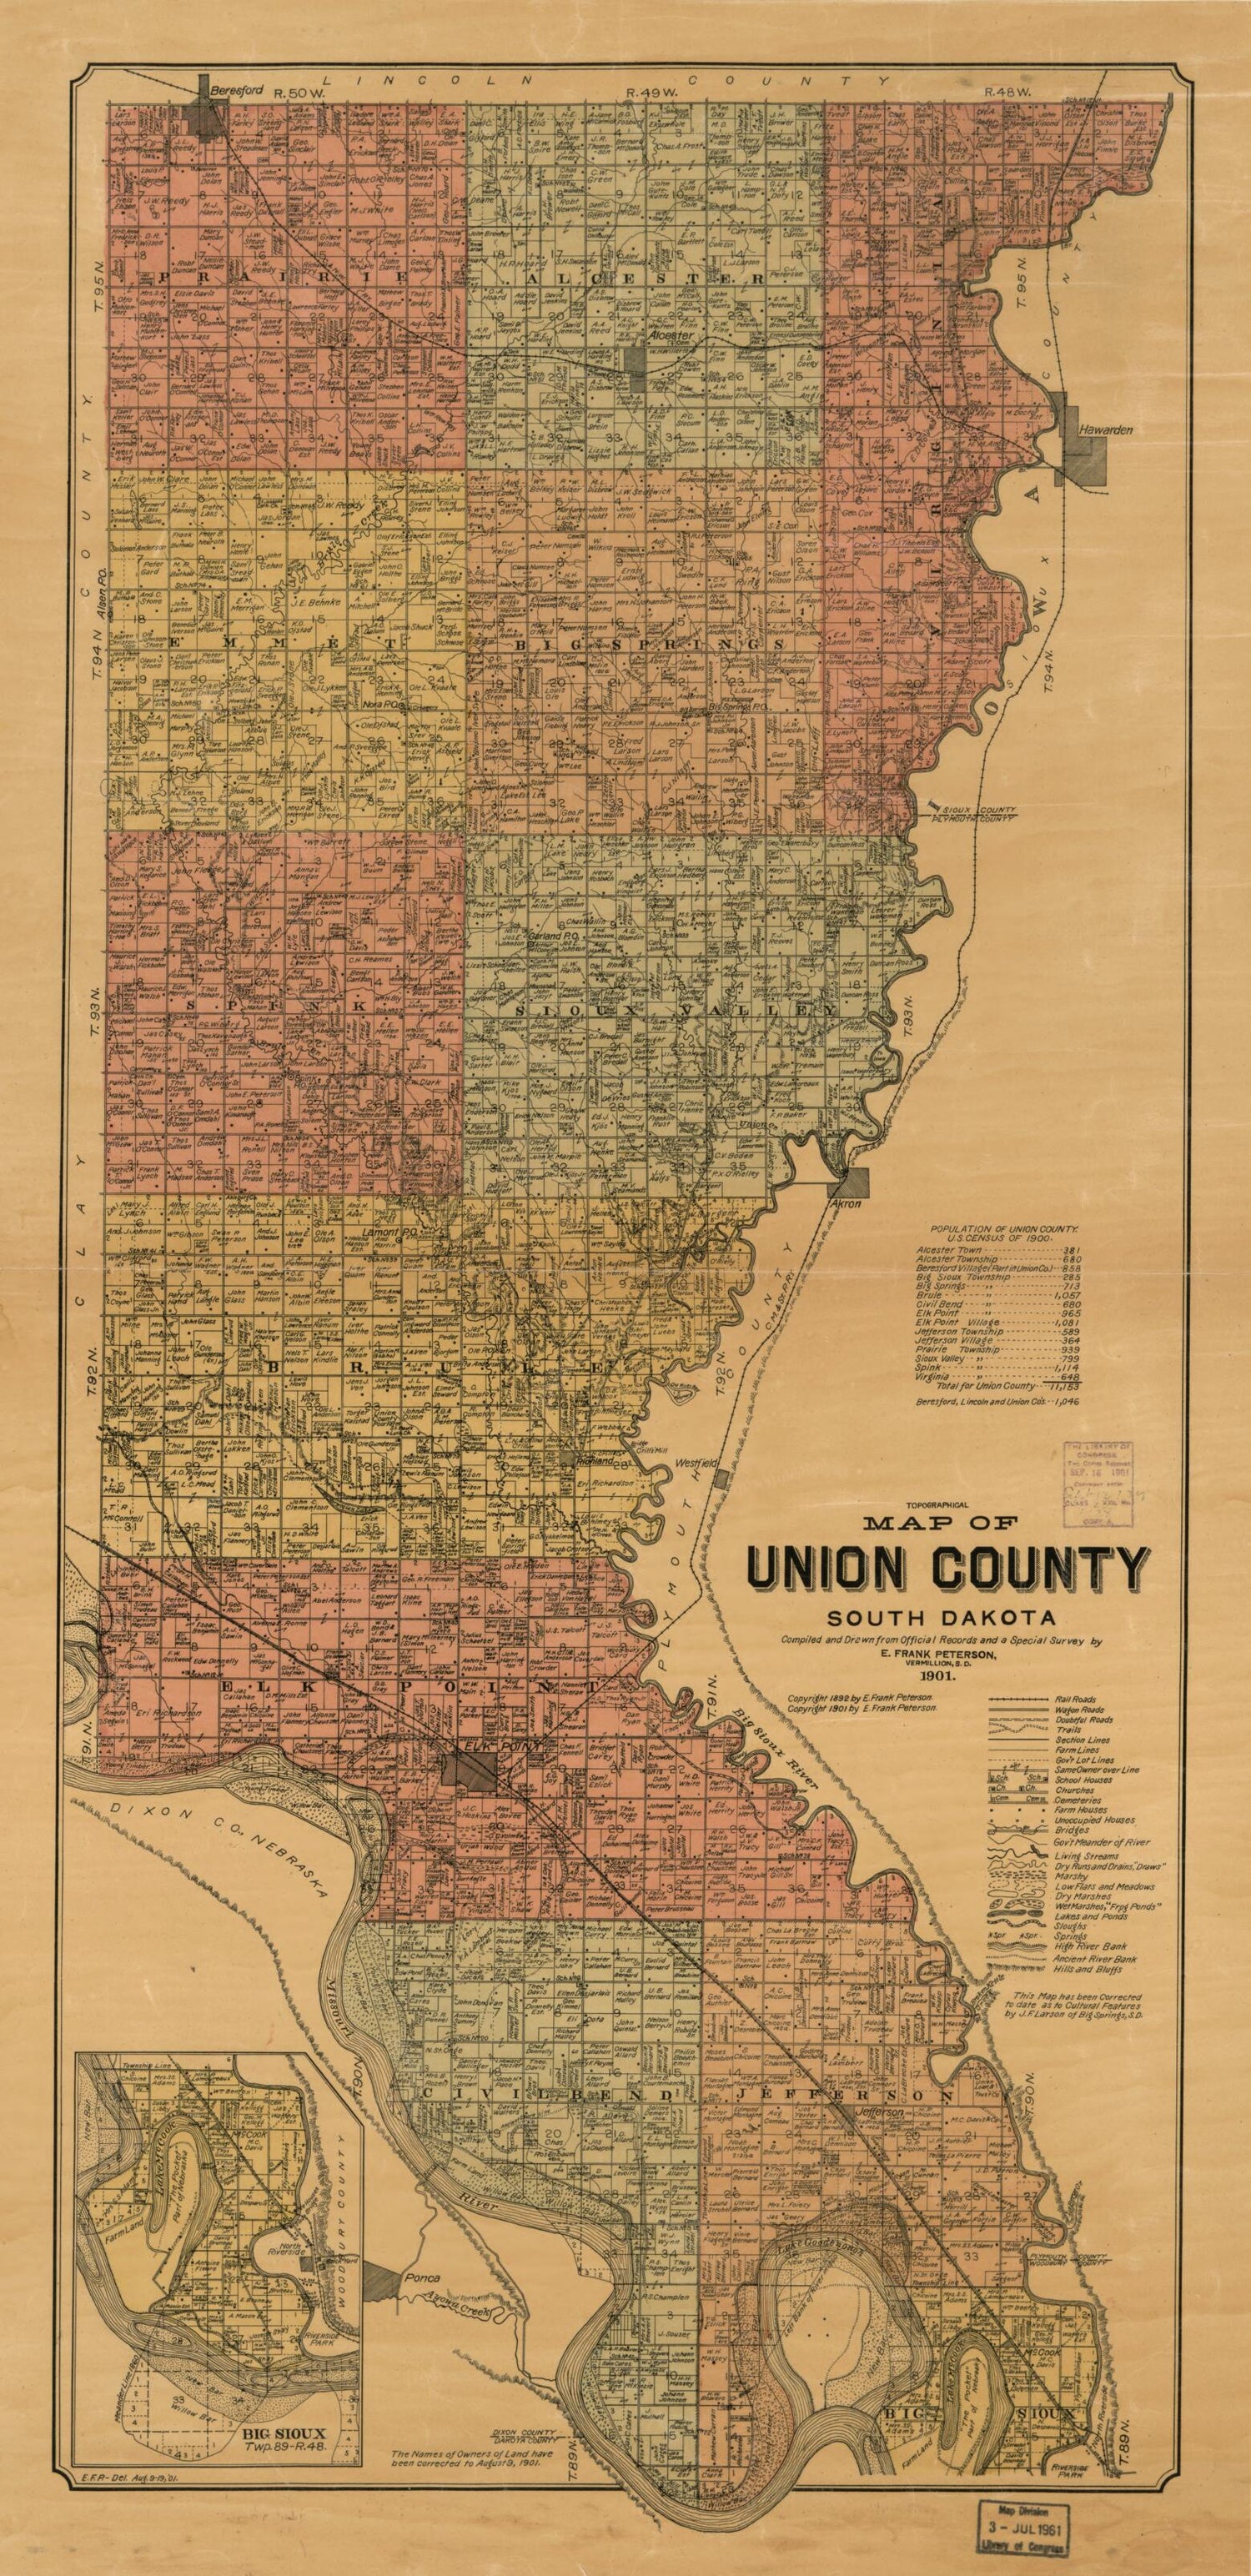 This old map of Map of Union County, South Dakota : Compiled and Drawn from Official Records and a Special Survey from 1892 was created by E. Frank Peterson in 1892